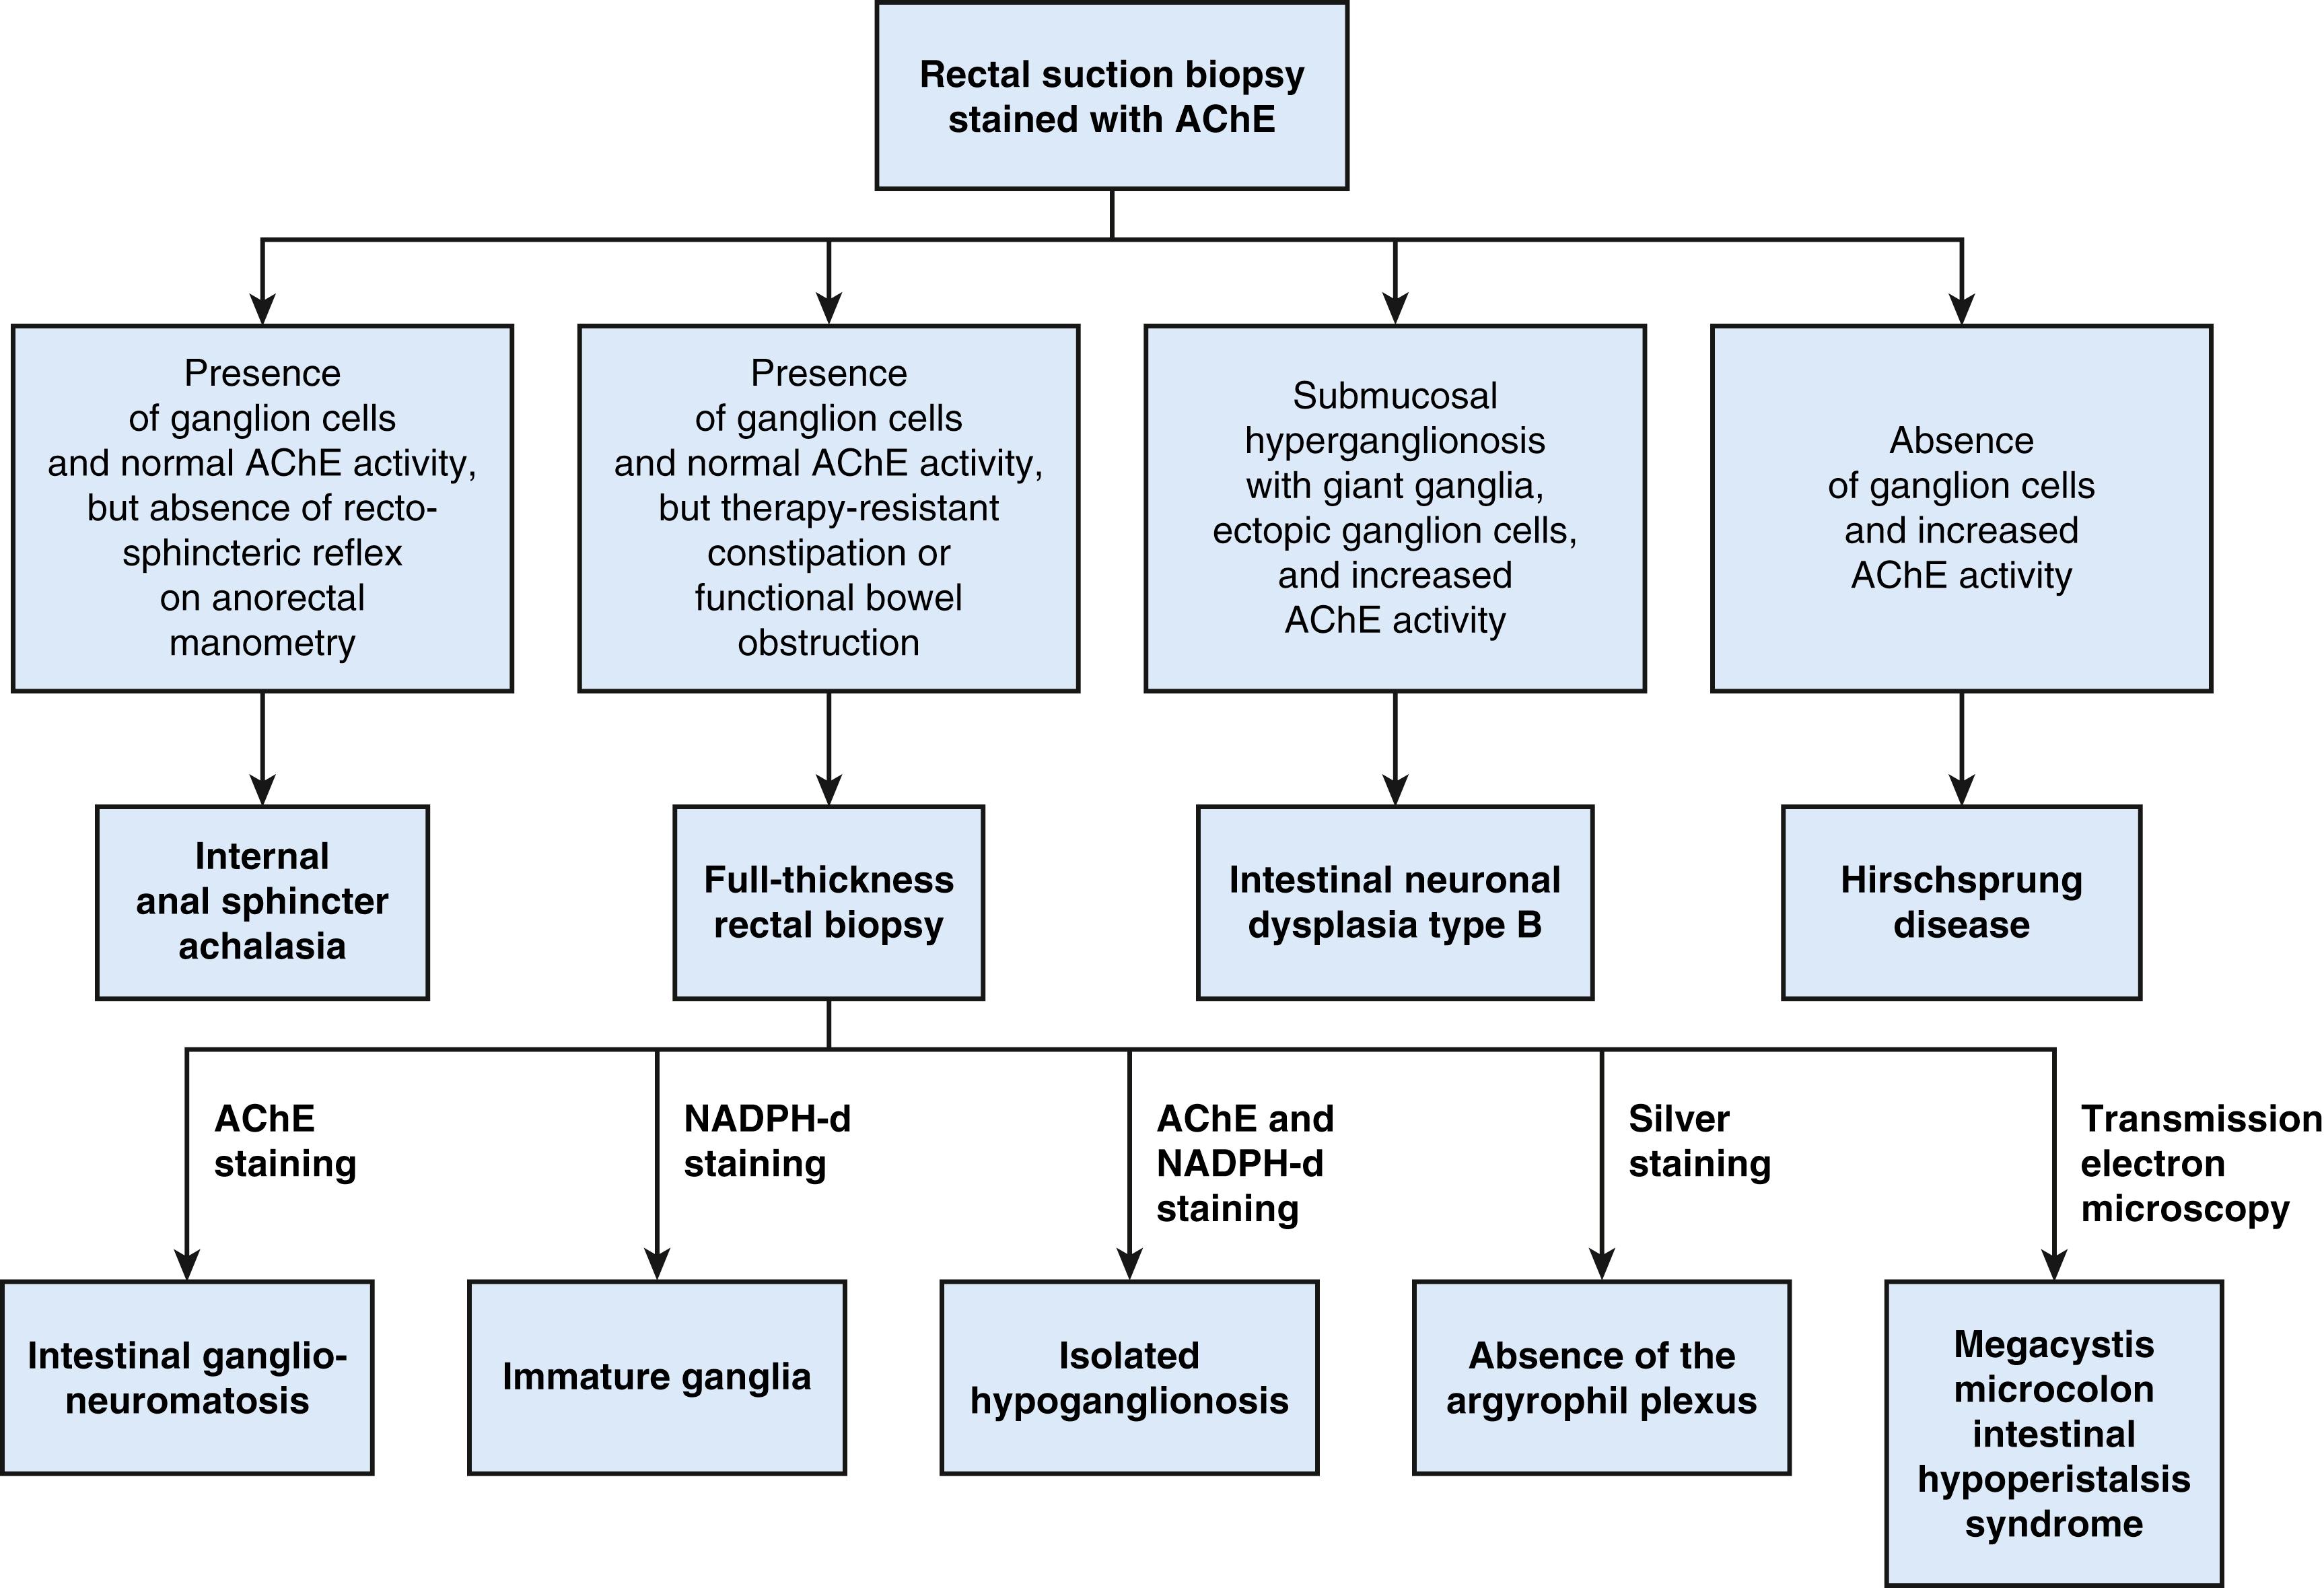 Fig. 19.4, Diagnostic algorithm for investigating chronic constipation and functional bowel obstruction in newborn infants and young children. AChE, acetylcholinesterase; NADPH-d, nicotinamide adenine dinucleotide phosphate diaphorase.